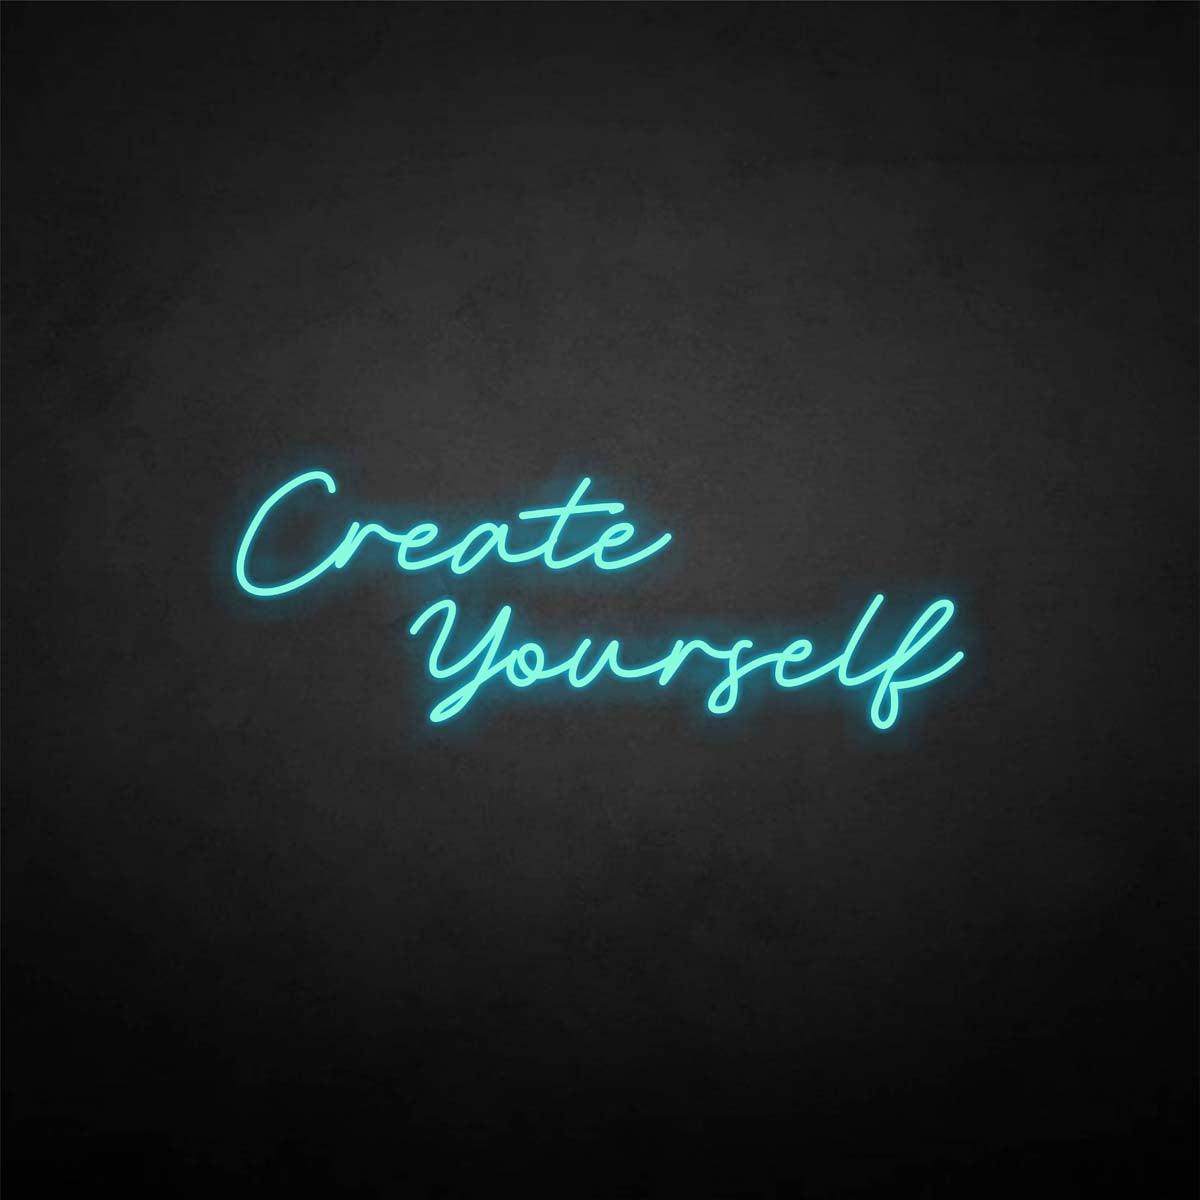 'Create yourself' neon sign